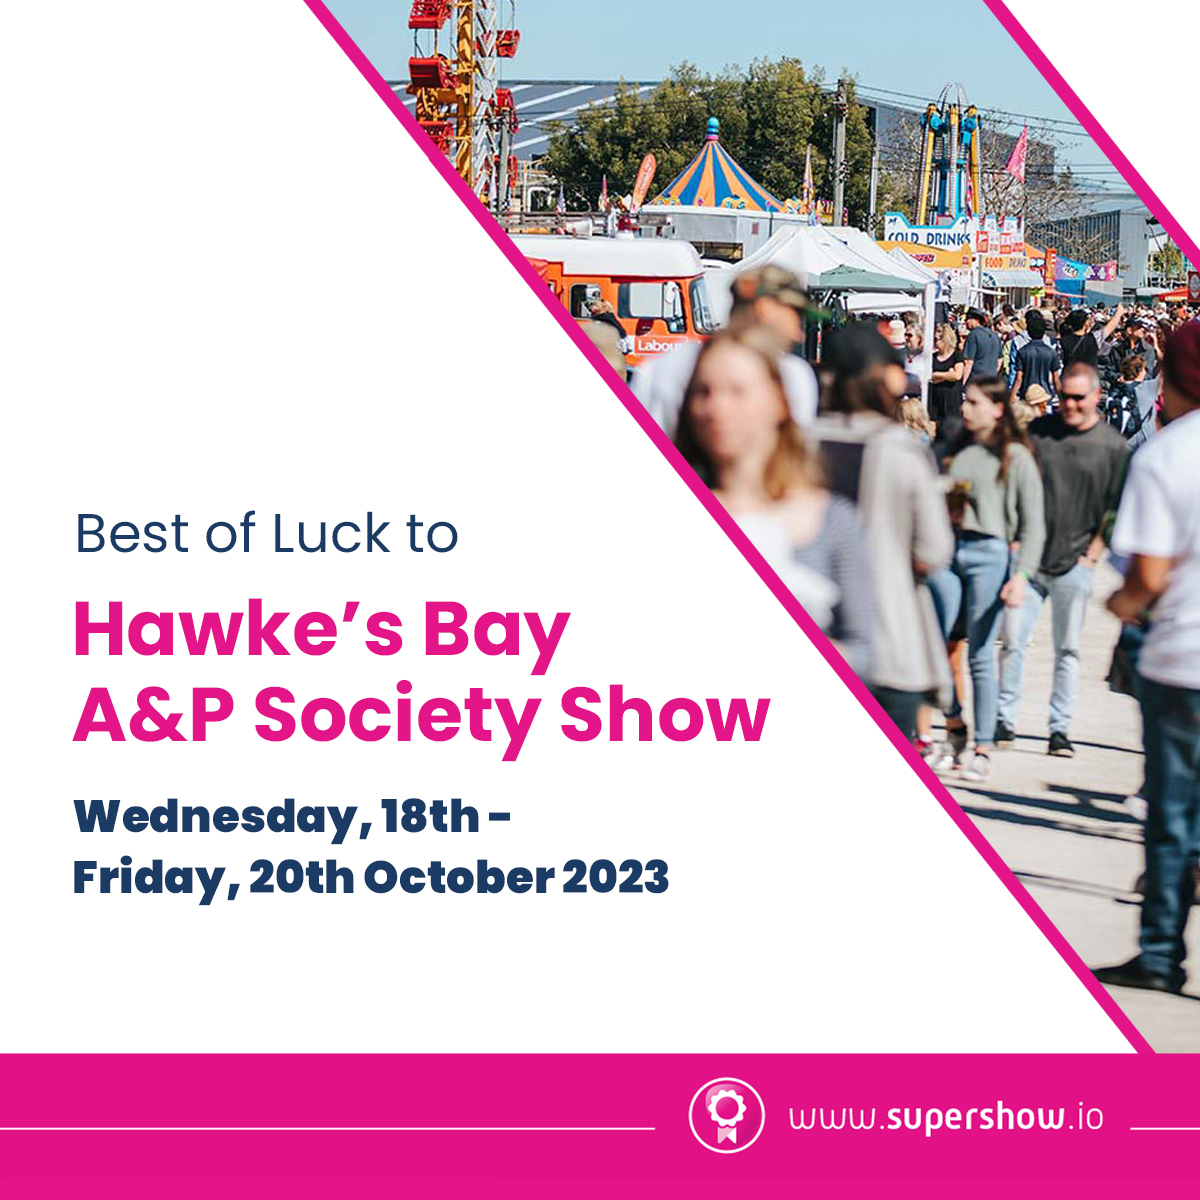 Wishing our client the Hawke's Bay A&P Society Show every deserved success for their show taking place from tomorrow until Friday in Hawkes Bay, New Zealand. Check out all the details on their @supershowmanagement powered website hbap.co.nz